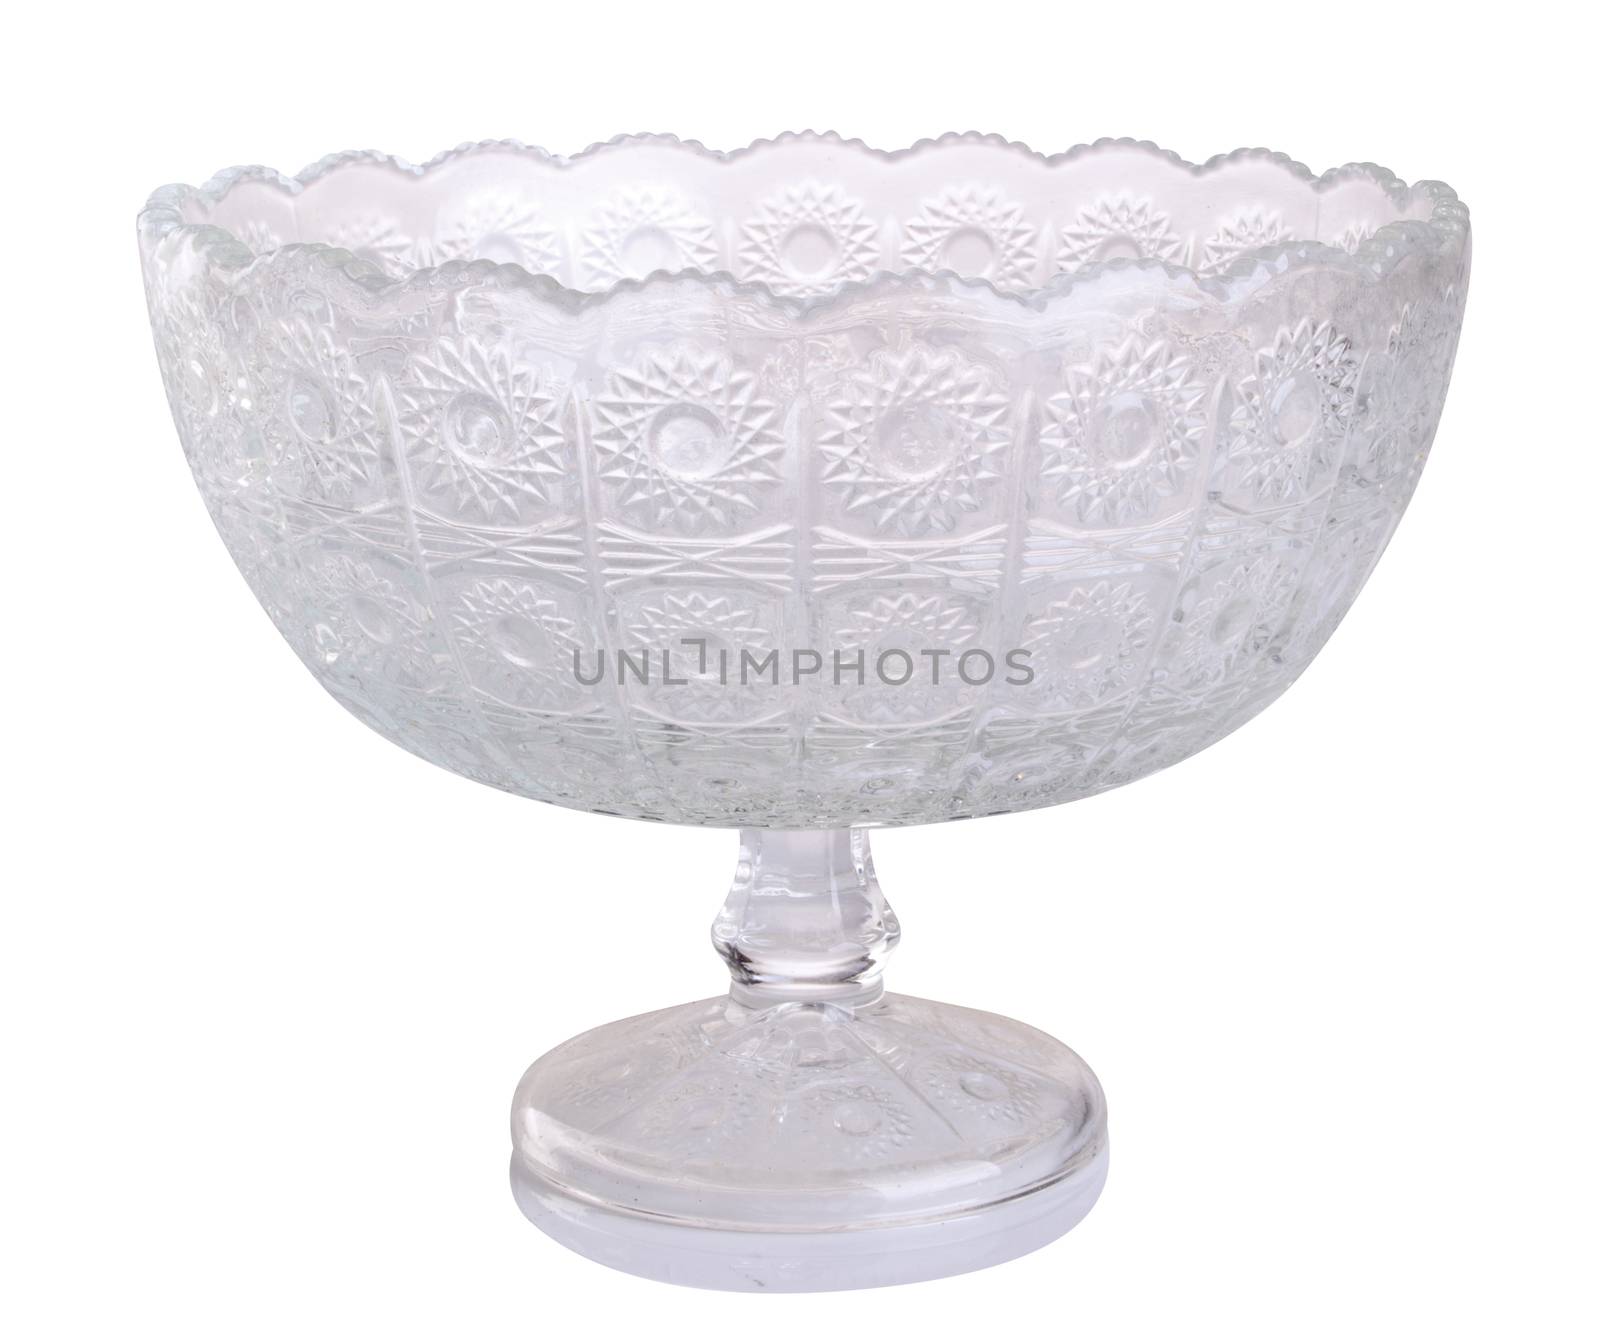 glass bowl. glass bowl on background. glass bowl on a background